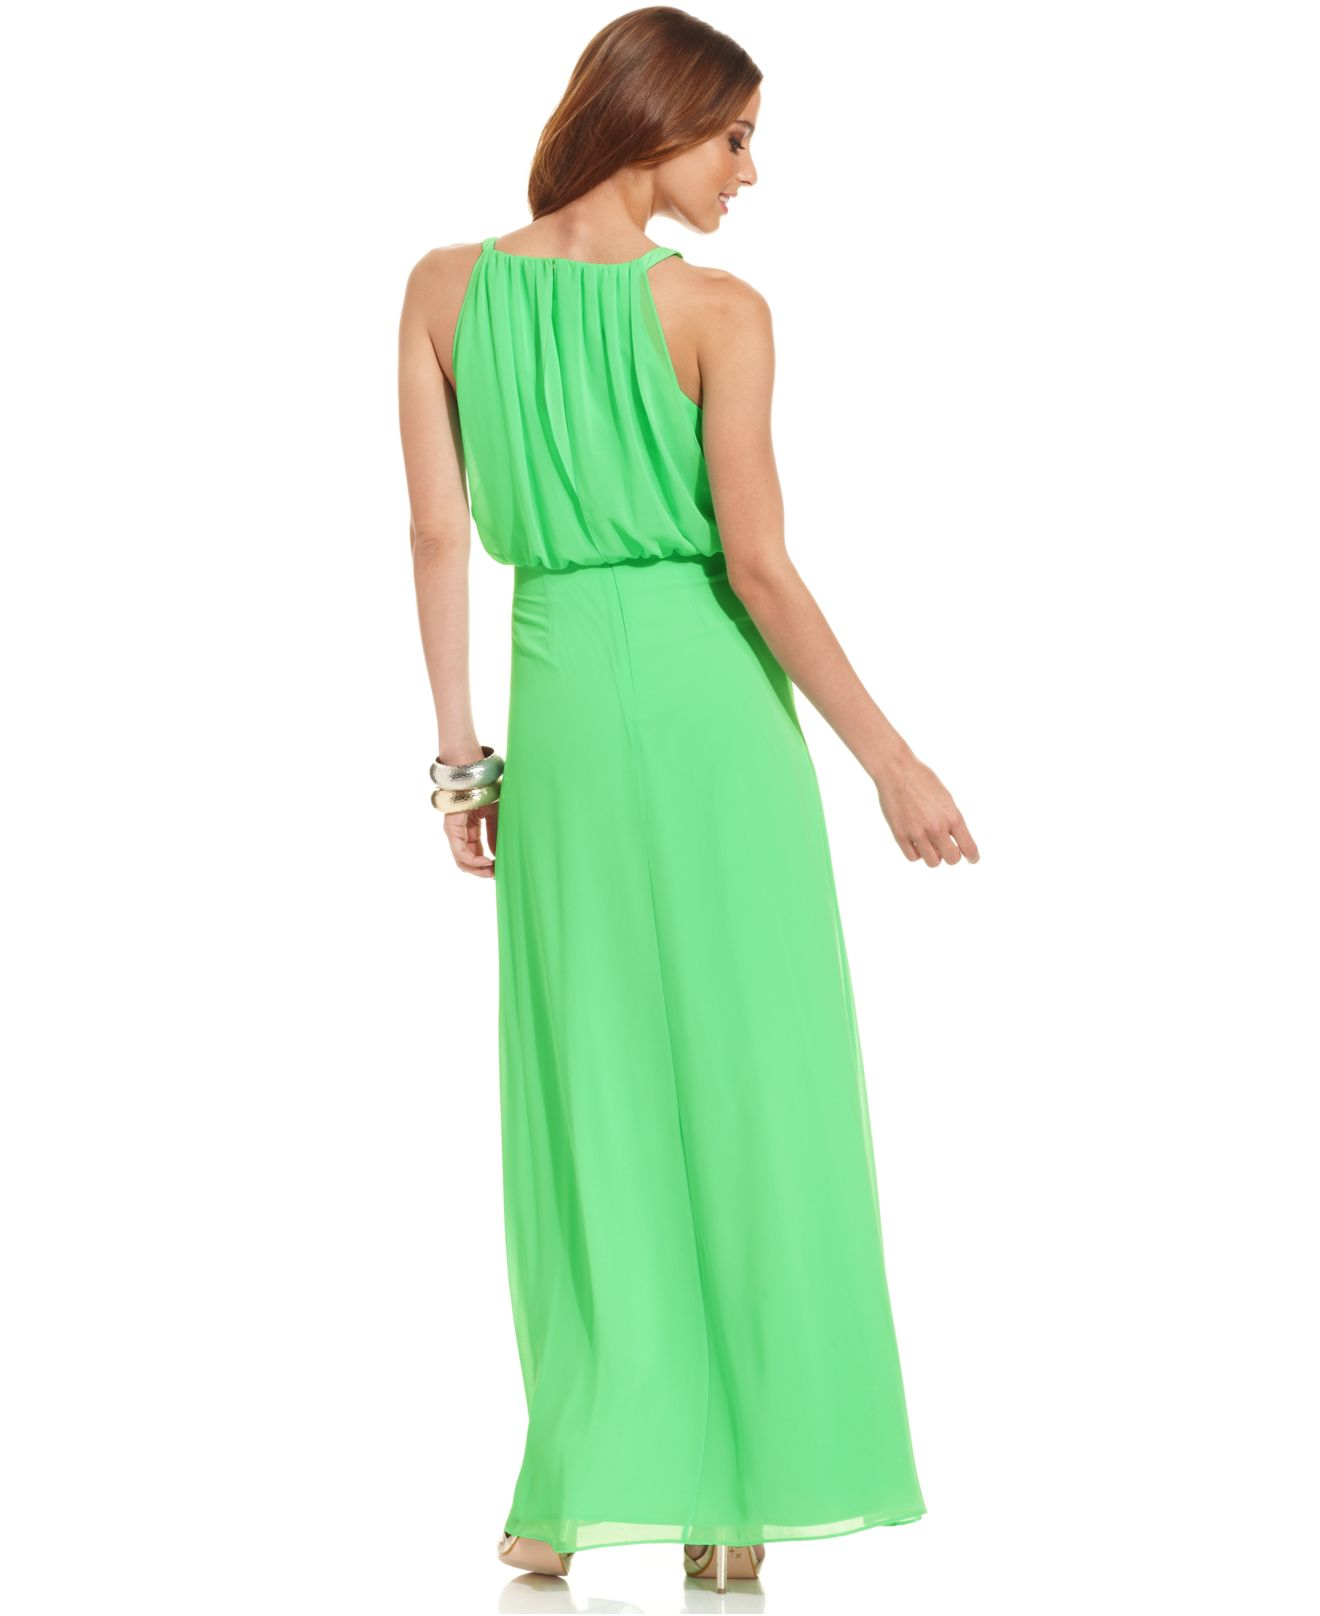 Lyst - Vince Camuto Sleeveless Blouson Maxi Dress in Green